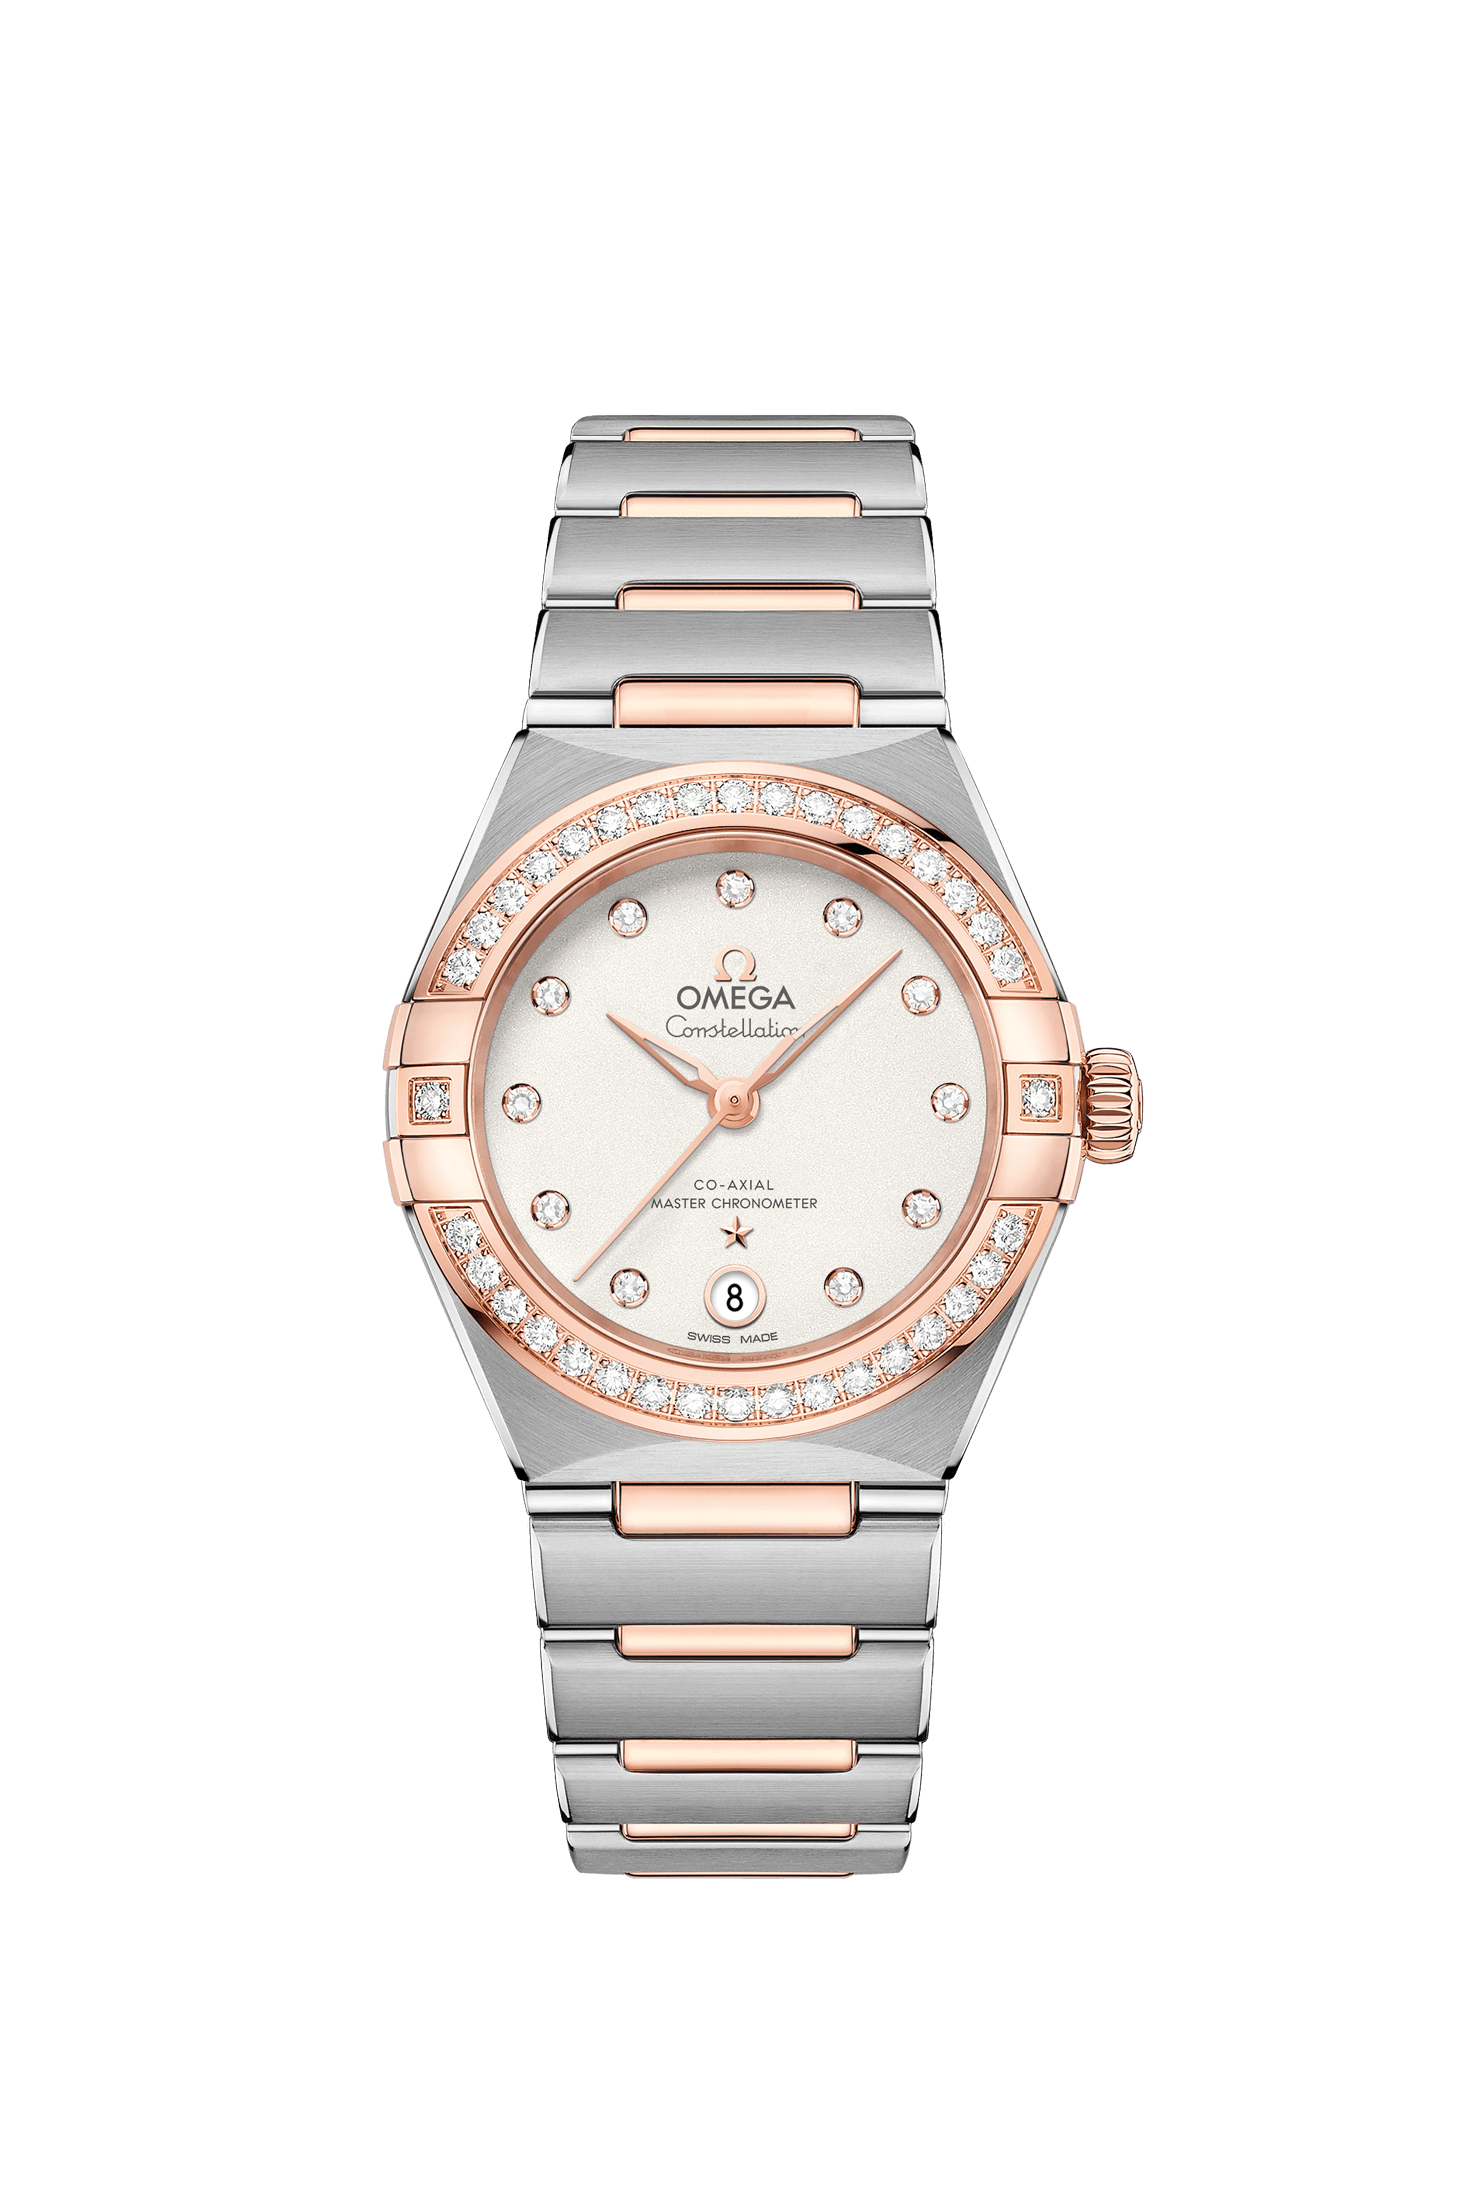 Ladies' watch  OMEGA, Constellation Co Axial Master Chronometer / 29mm, SKU: 131.25.29.20.52.001 | watchapproach.com